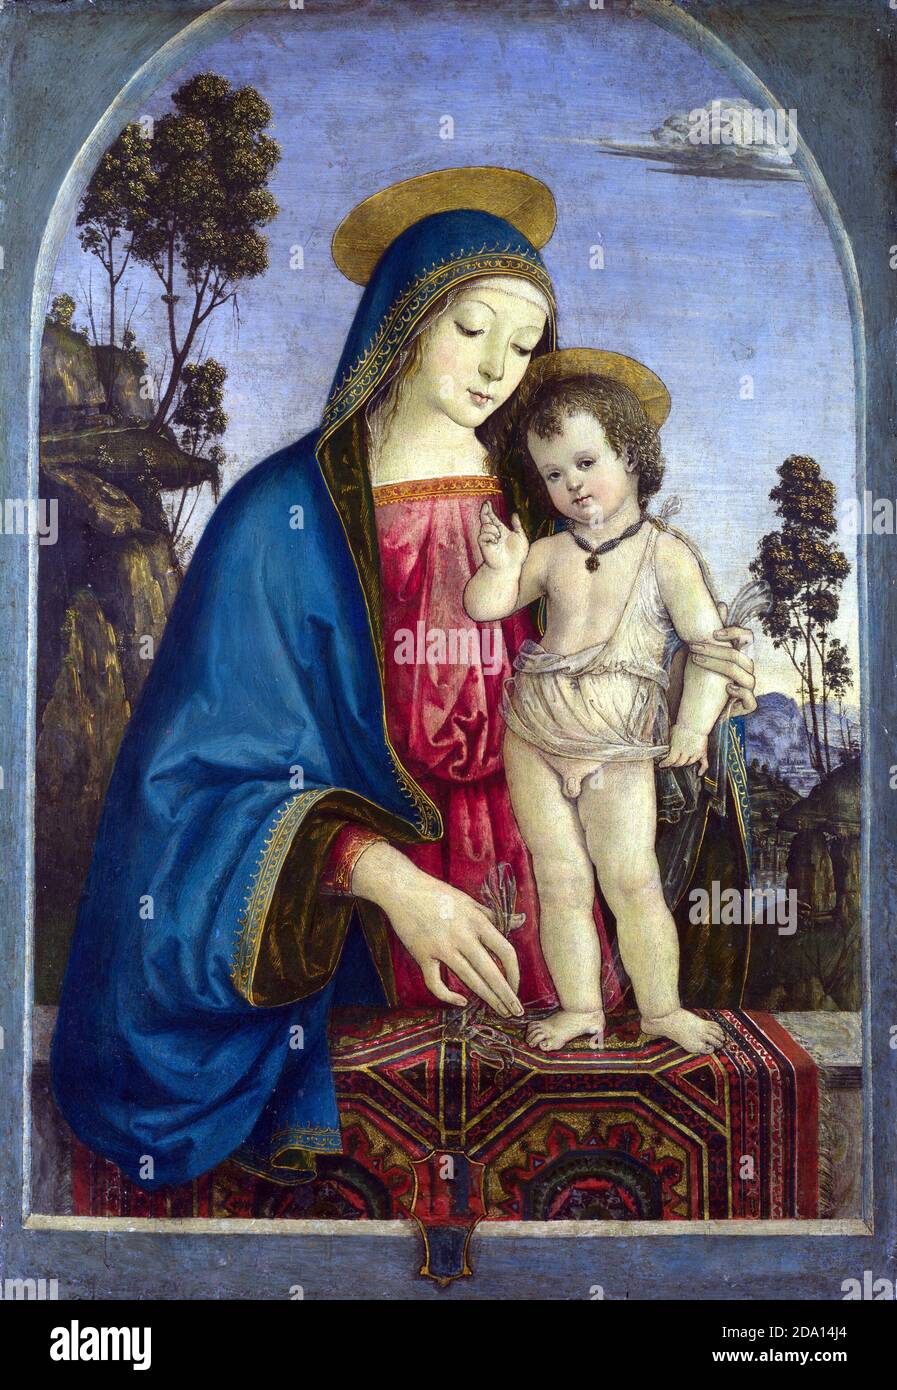 PINTURICCHIO - The Virgin and Child. Old European oil painting, classic style. Stock Photo